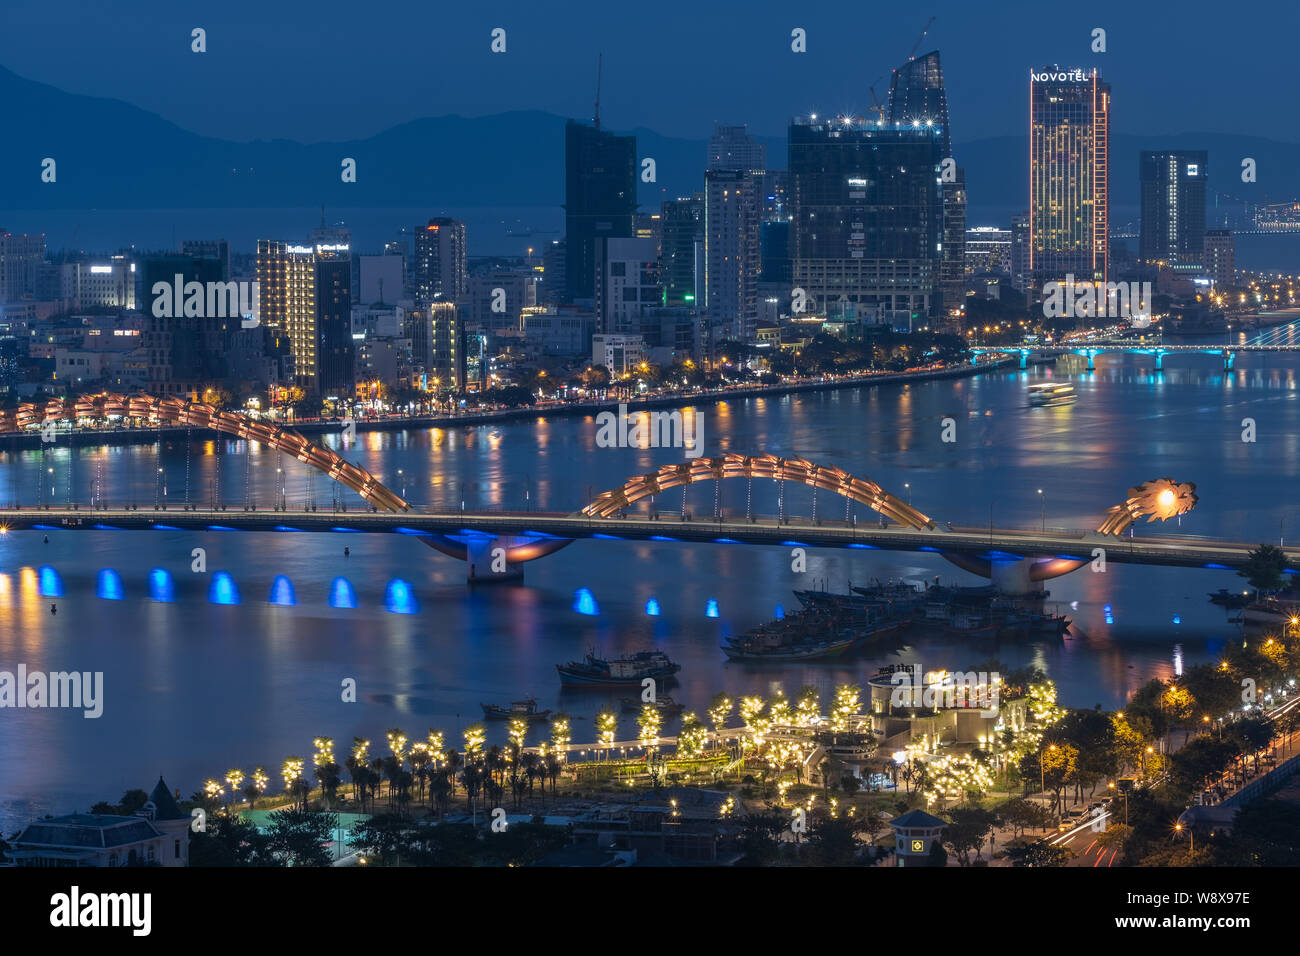 Overview of Danang city at dusk and night time, Vietnam Stock Photo